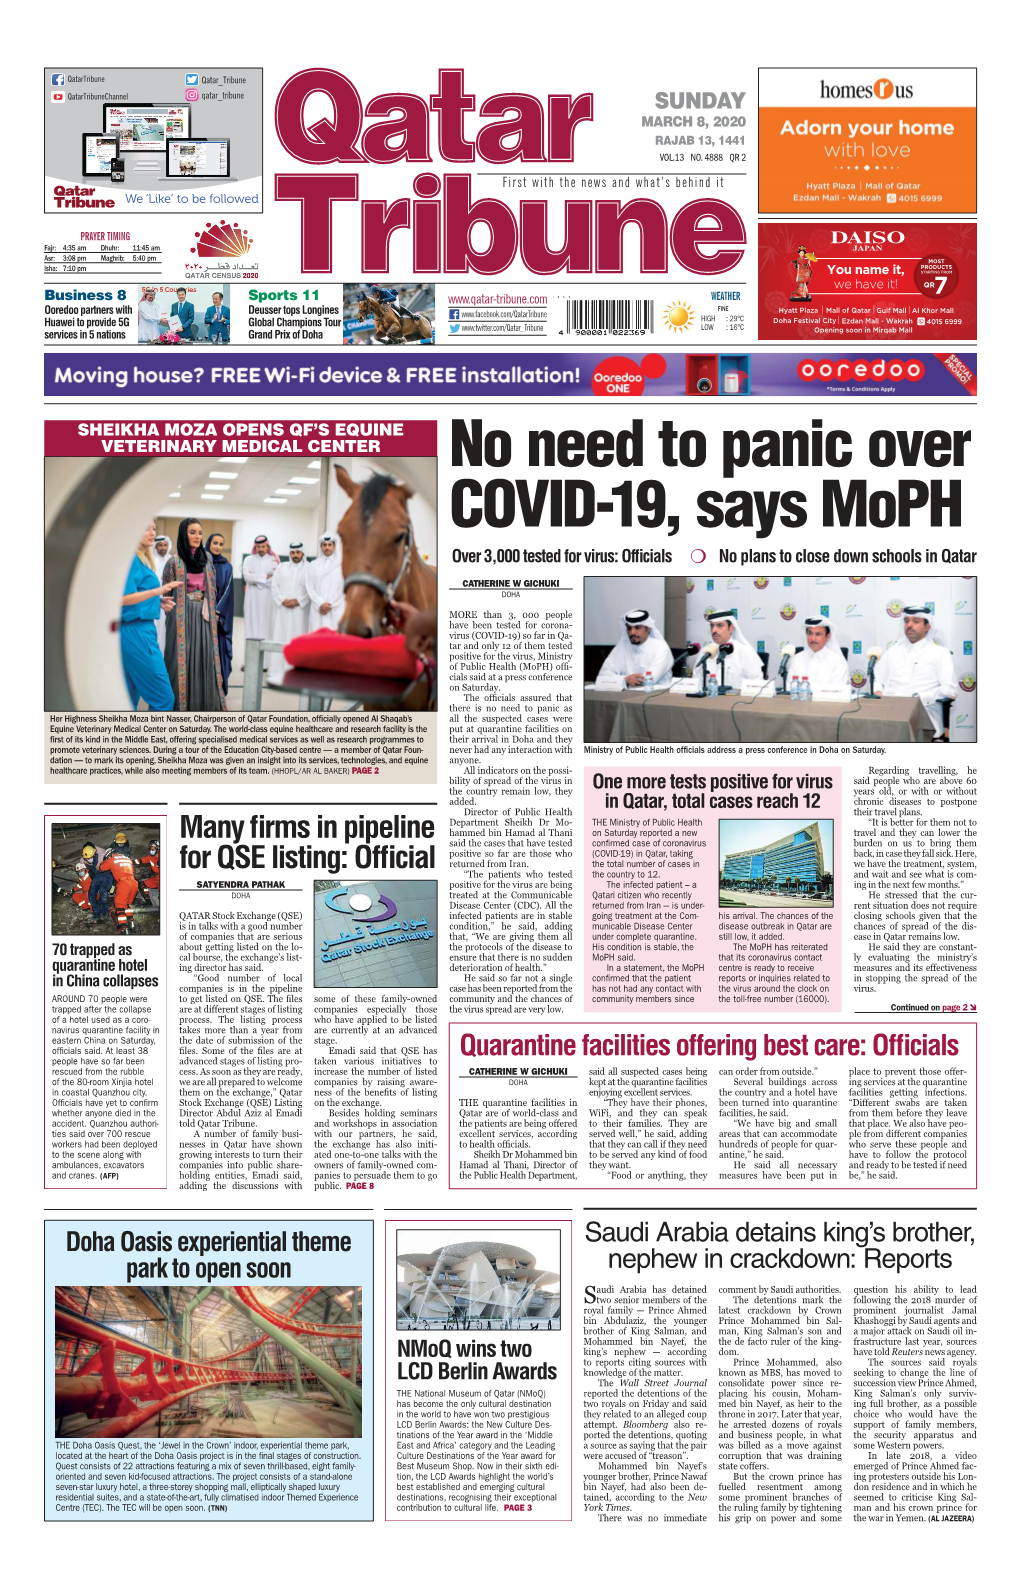 No Need to Panic Over COVID-19, Says Moph Over 3,000 Tested for Virus: Ofﬁcials No Plans to Close Down Schools in Qatar